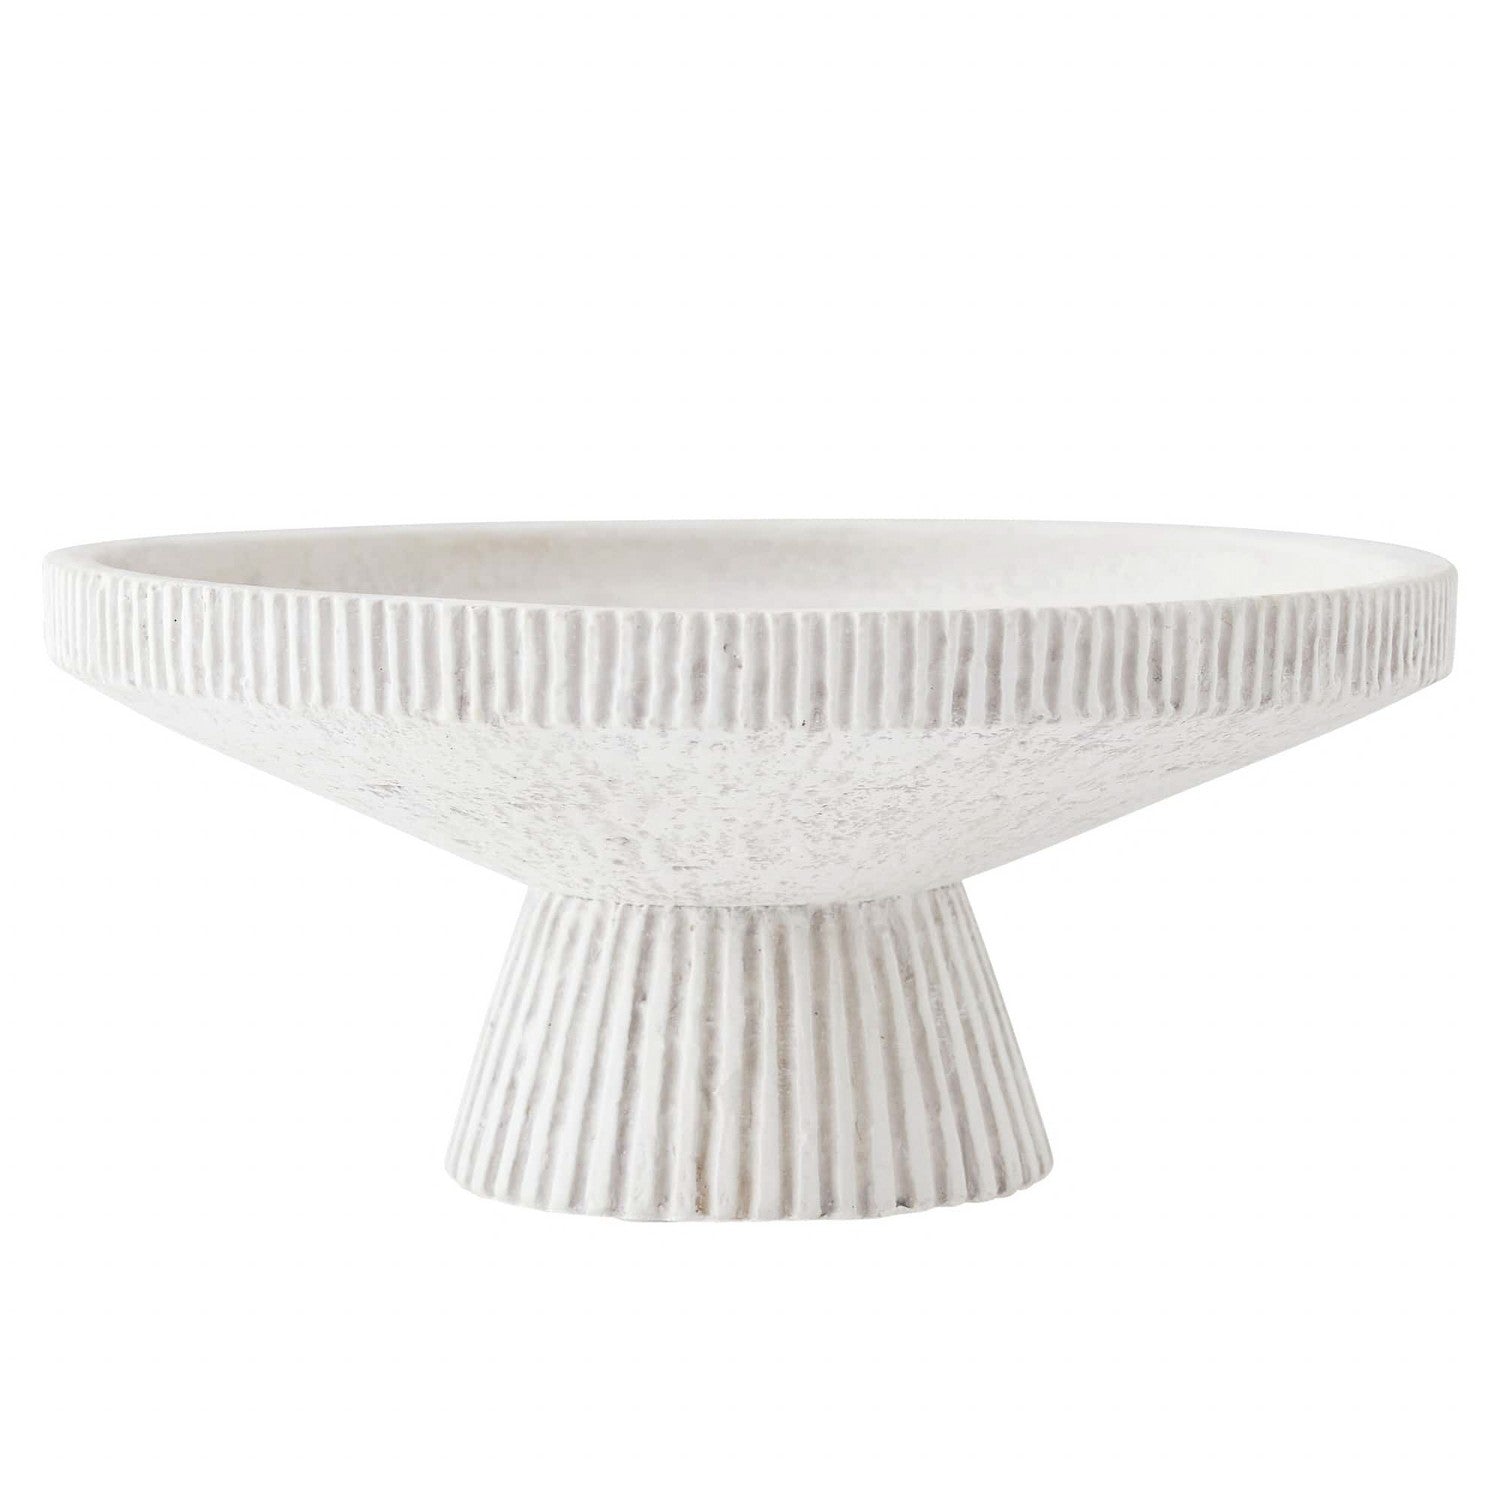 Centerpiece from the Valour collection in White finish